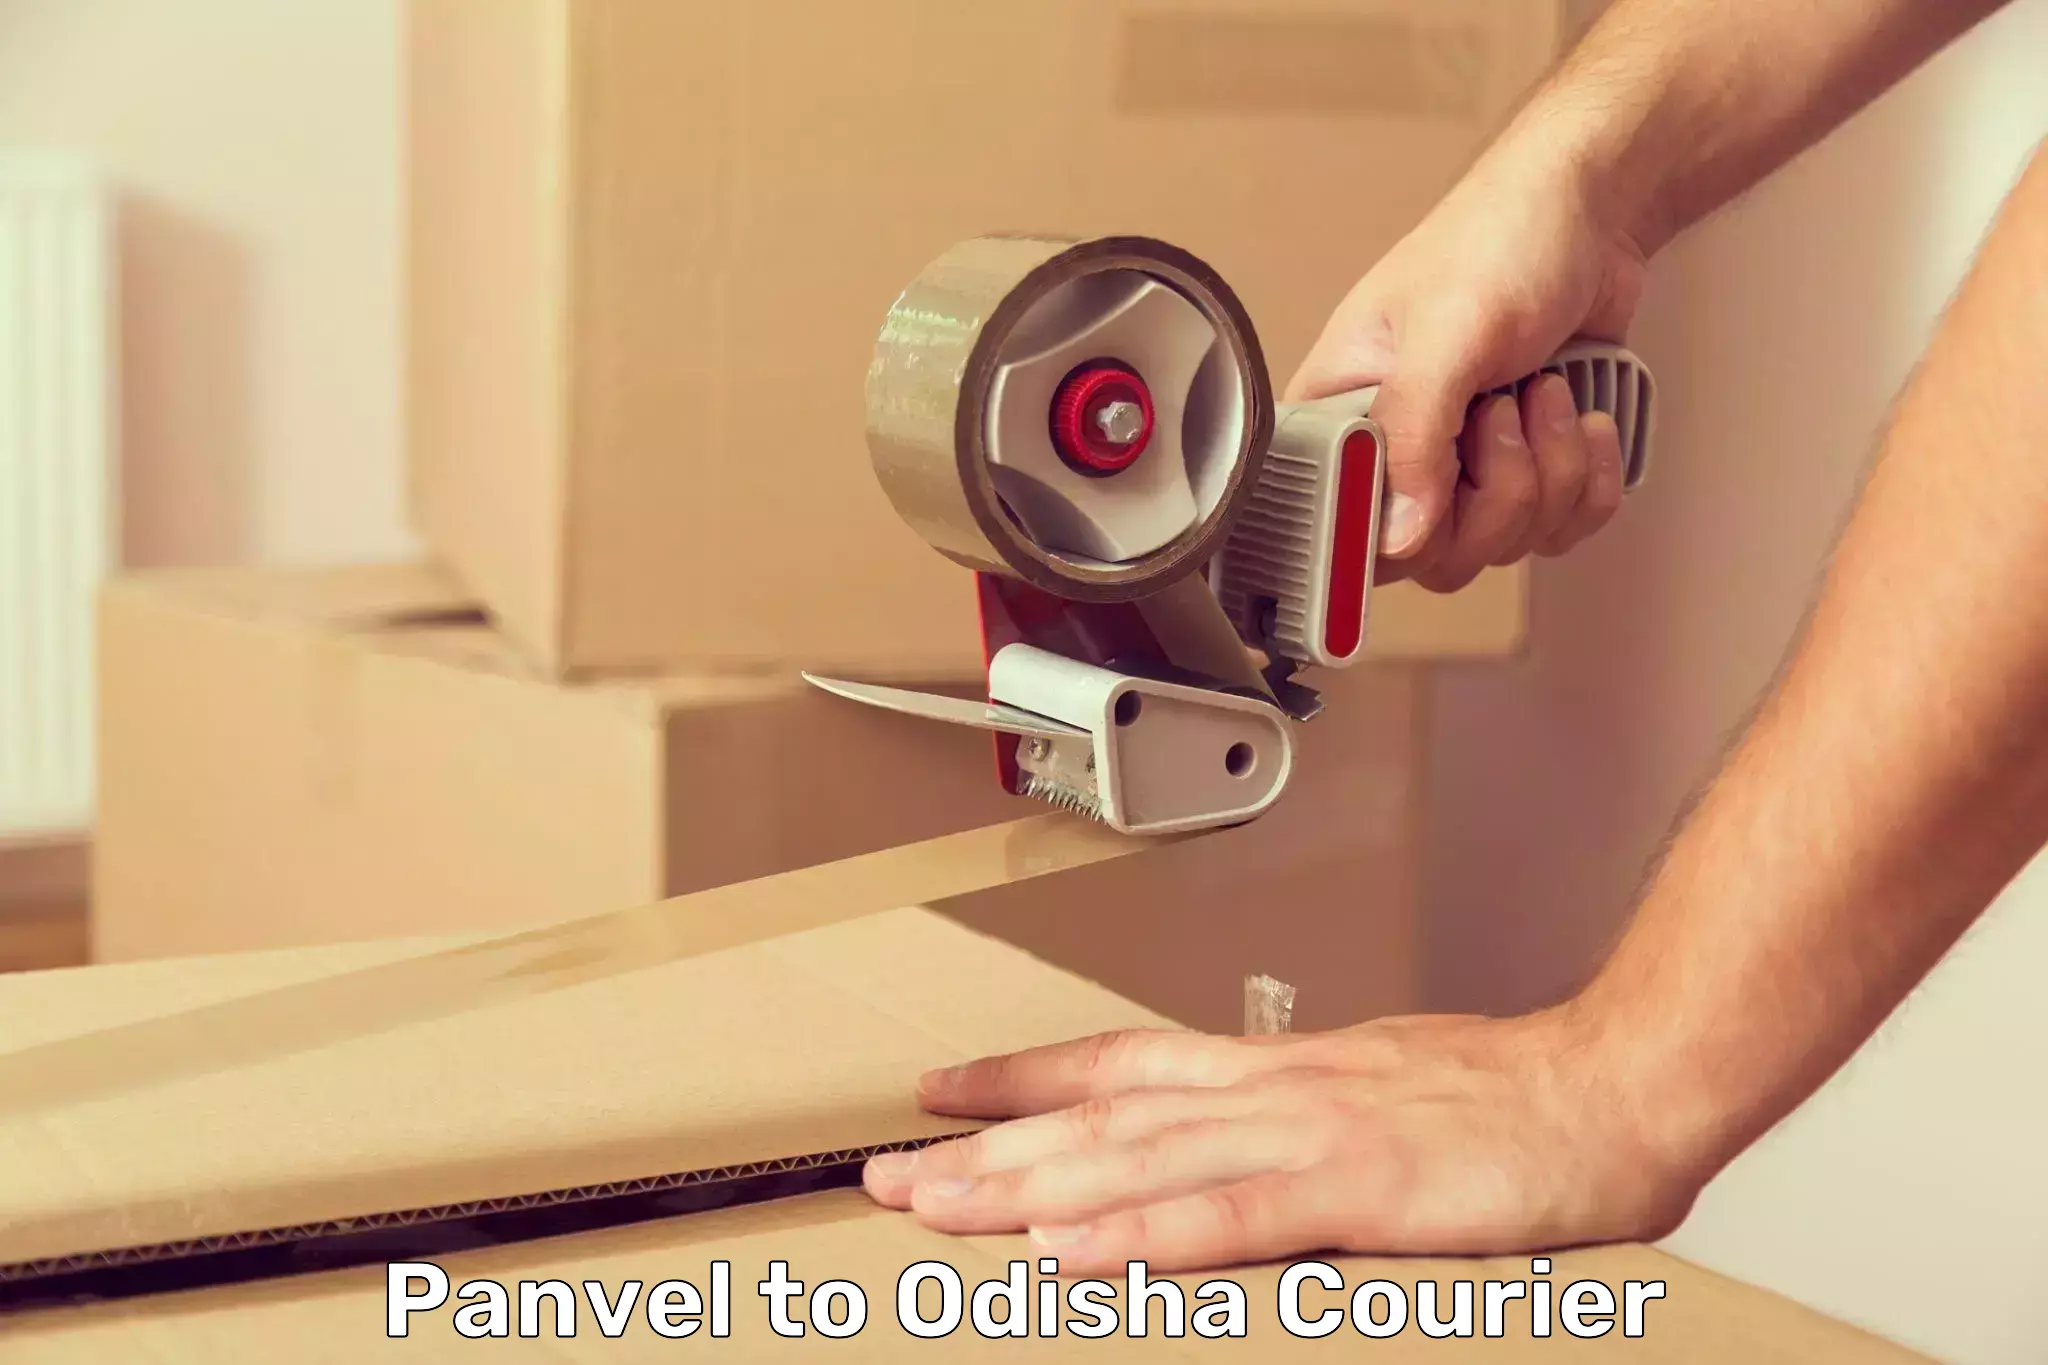 Multi-national courier services Panvel to Mathili